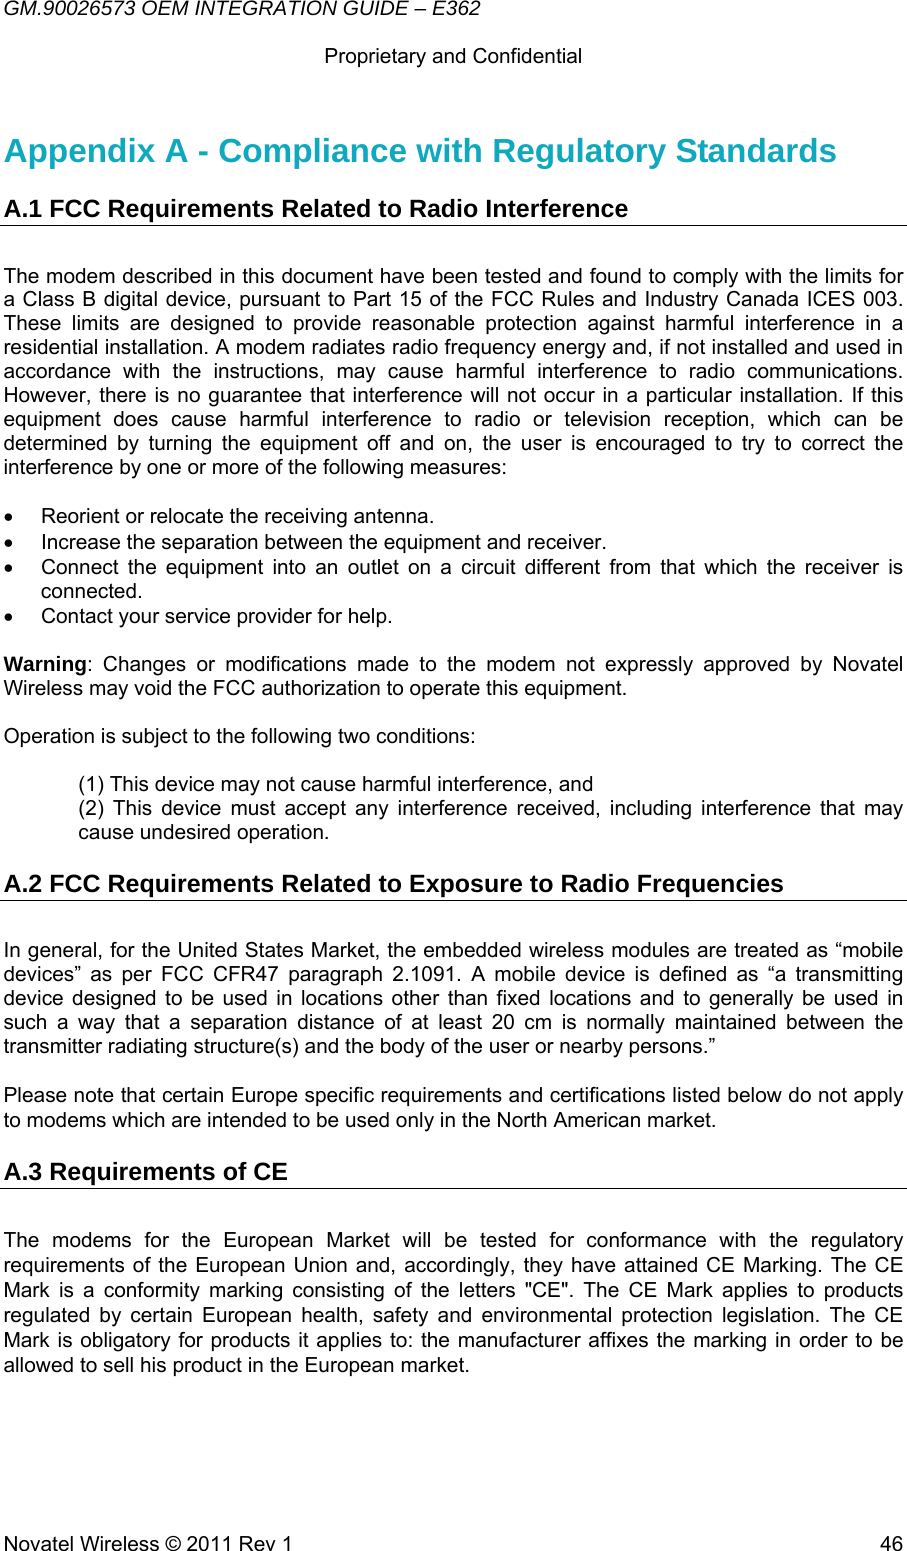 GM.90026573 OEM INTEGRATION GUIDE – E362      Proprietary and Confidential   Novatel Wireless © 2011 Rev 1  46Appendix A - Compliance with Regulatory Standards A.1 FCC Requirements Related to Radio Interference  The modem described in this document have been tested and found to comply with the limits for a Class B digital device, pursuant to Part 15 of the FCC Rules and Industry Canada ICES 003. These limits are designed to provide reasonable protection against harmful interference in a residential installation. A modem radiates radio frequency energy and, if not installed and used in accordance with the instructions, may cause harmful interference to radio communications. However, there is no guarantee that interference will not occur in a particular installation. If this equipment does cause harmful interference to radio or television reception, which can be determined by turning the equipment off and on, the user is encouraged to try to correct the interference by one or more of the following measures:  •  Reorient or relocate the receiving antenna. •  Increase the separation between the equipment and receiver. •  Connect the equipment into an outlet on a circuit different from that which the receiver is connected. •  Contact your service provider for help.  Warning: Changes or modifications made to the modem not expressly approved by Novatel Wireless may void the FCC authorization to operate this equipment.  Operation is subject to the following two conditions:   (1) This device may not cause harmful interference, and (2) This device must accept any interference received, including interference that may cause undesired operation. A.2 FCC Requirements Related to Exposure to Radio Frequencies In general, for the United States Market, the embedded wireless modules are treated as “mobile devices” as per FCC CFR47 paragraph 2.1091. A mobile device is defined as “a transmitting device designed to be used in locations other than fixed locations and to generally be used in such a way that a separation distance of at least 20 cm is normally maintained between the transmitter radiating structure(s) and the body of the user or nearby persons.”  Please note that certain Europe specific requirements and certifications listed below do not apply to modems which are intended to be used only in the North American market. A.3 Requirements of CE  The modems for the European Market will be tested for conformance with the regulatory requirements of the European Union and, accordingly, they have attained CE Marking. The CE Mark is a conformity marking consisting of the letters &quot;CE&quot;. The CE Mark applies to products regulated by certain European health, safety and environmental protection legislation. The CE Mark is obligatory for products it applies to: the manufacturer affixes the marking in order to be allowed to sell his product in the European market. 